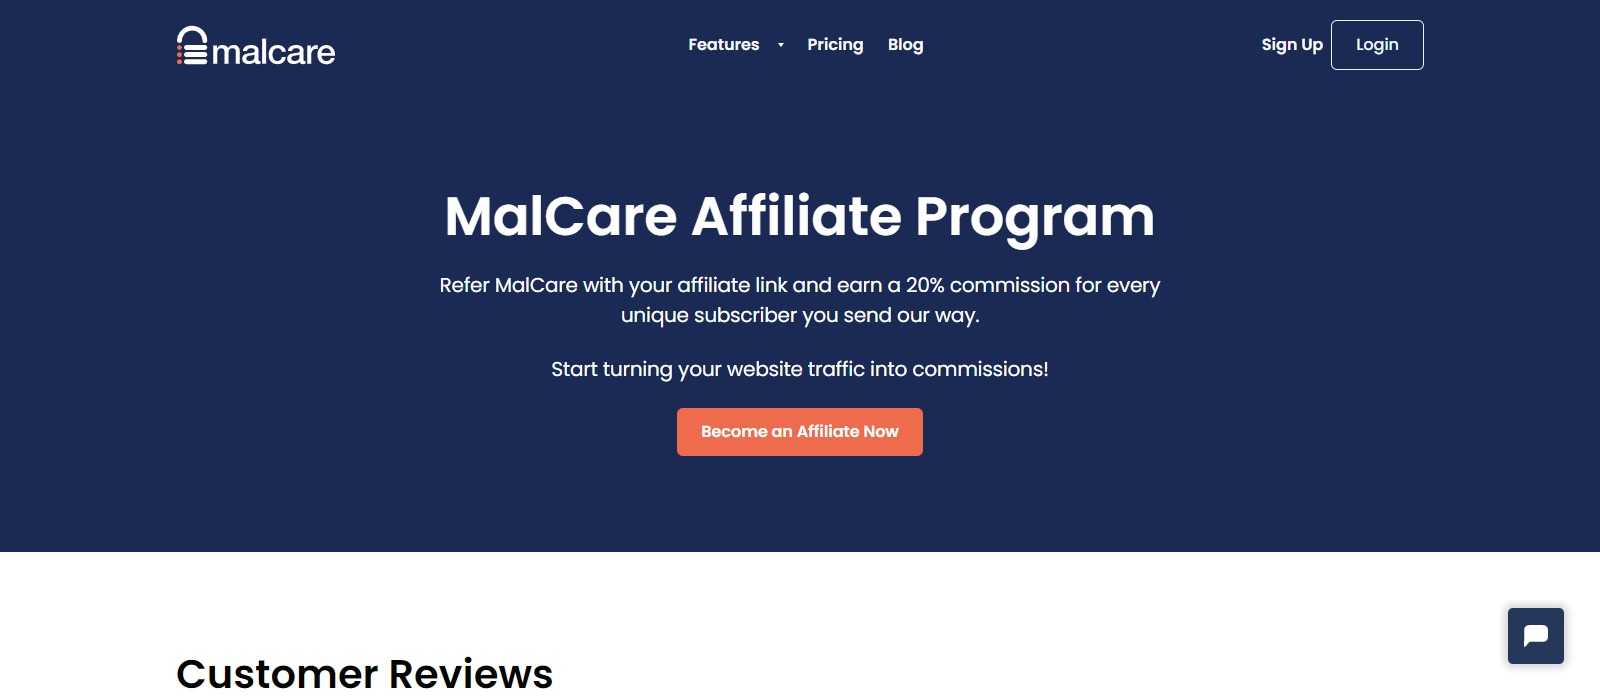 MalCare Affiliates Program Review: 20% Recurring Commission for the First year